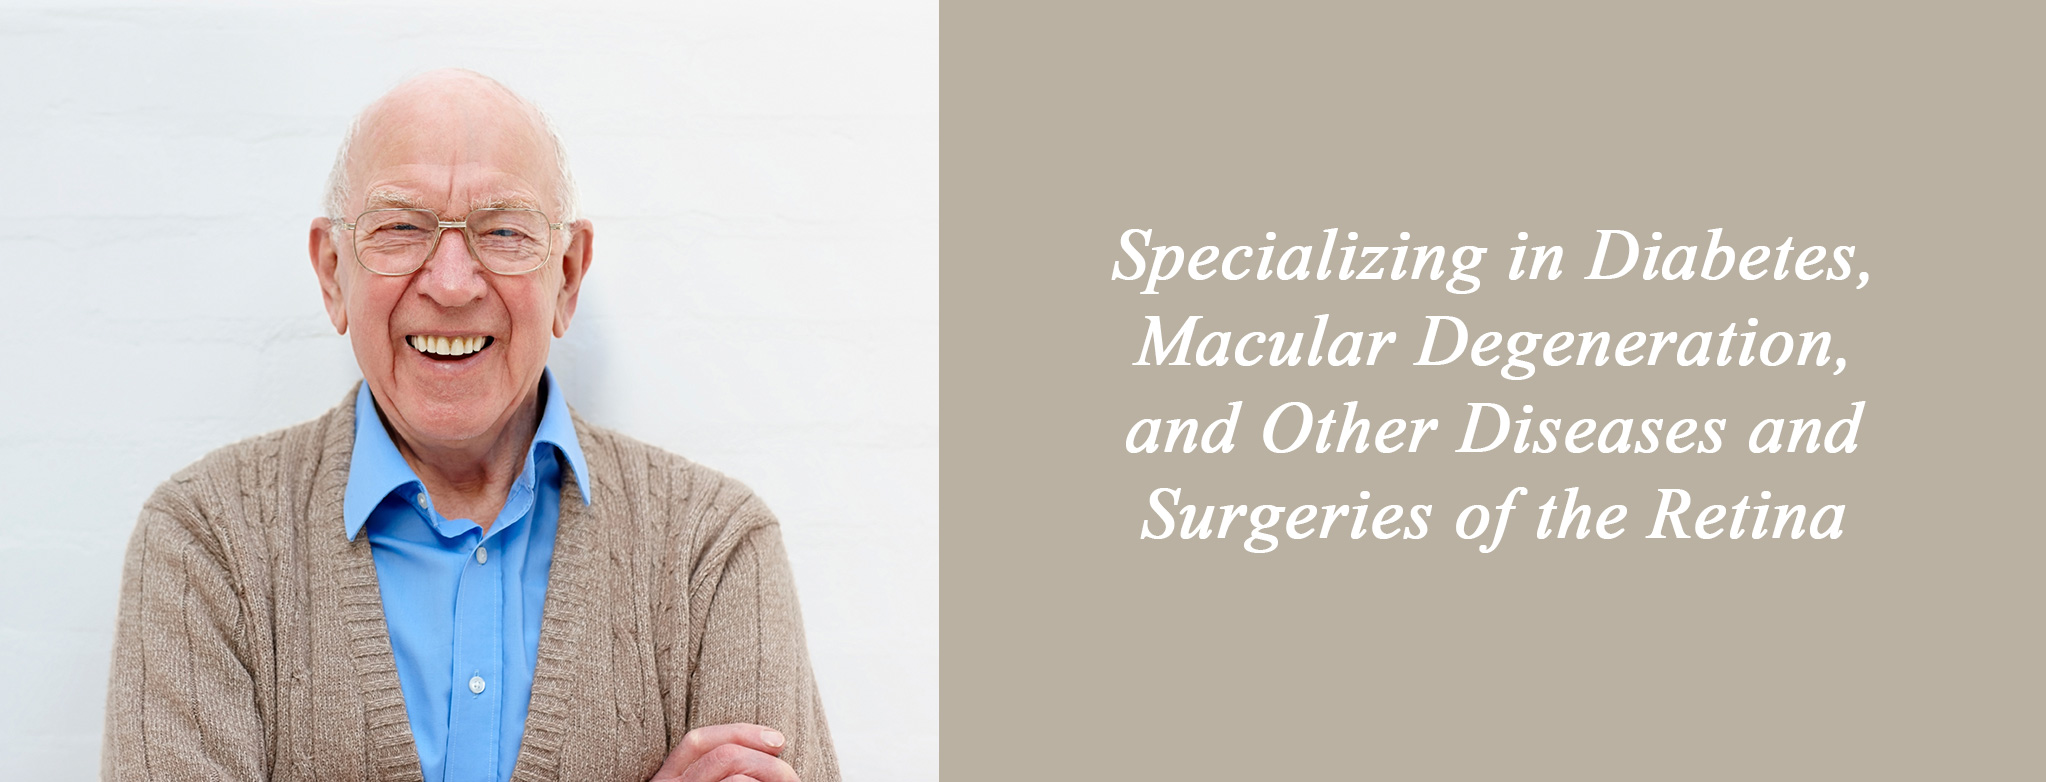 Specializing in Diabetes, Macular Degeneration, and Other Diseases and Surgeries of the Retina